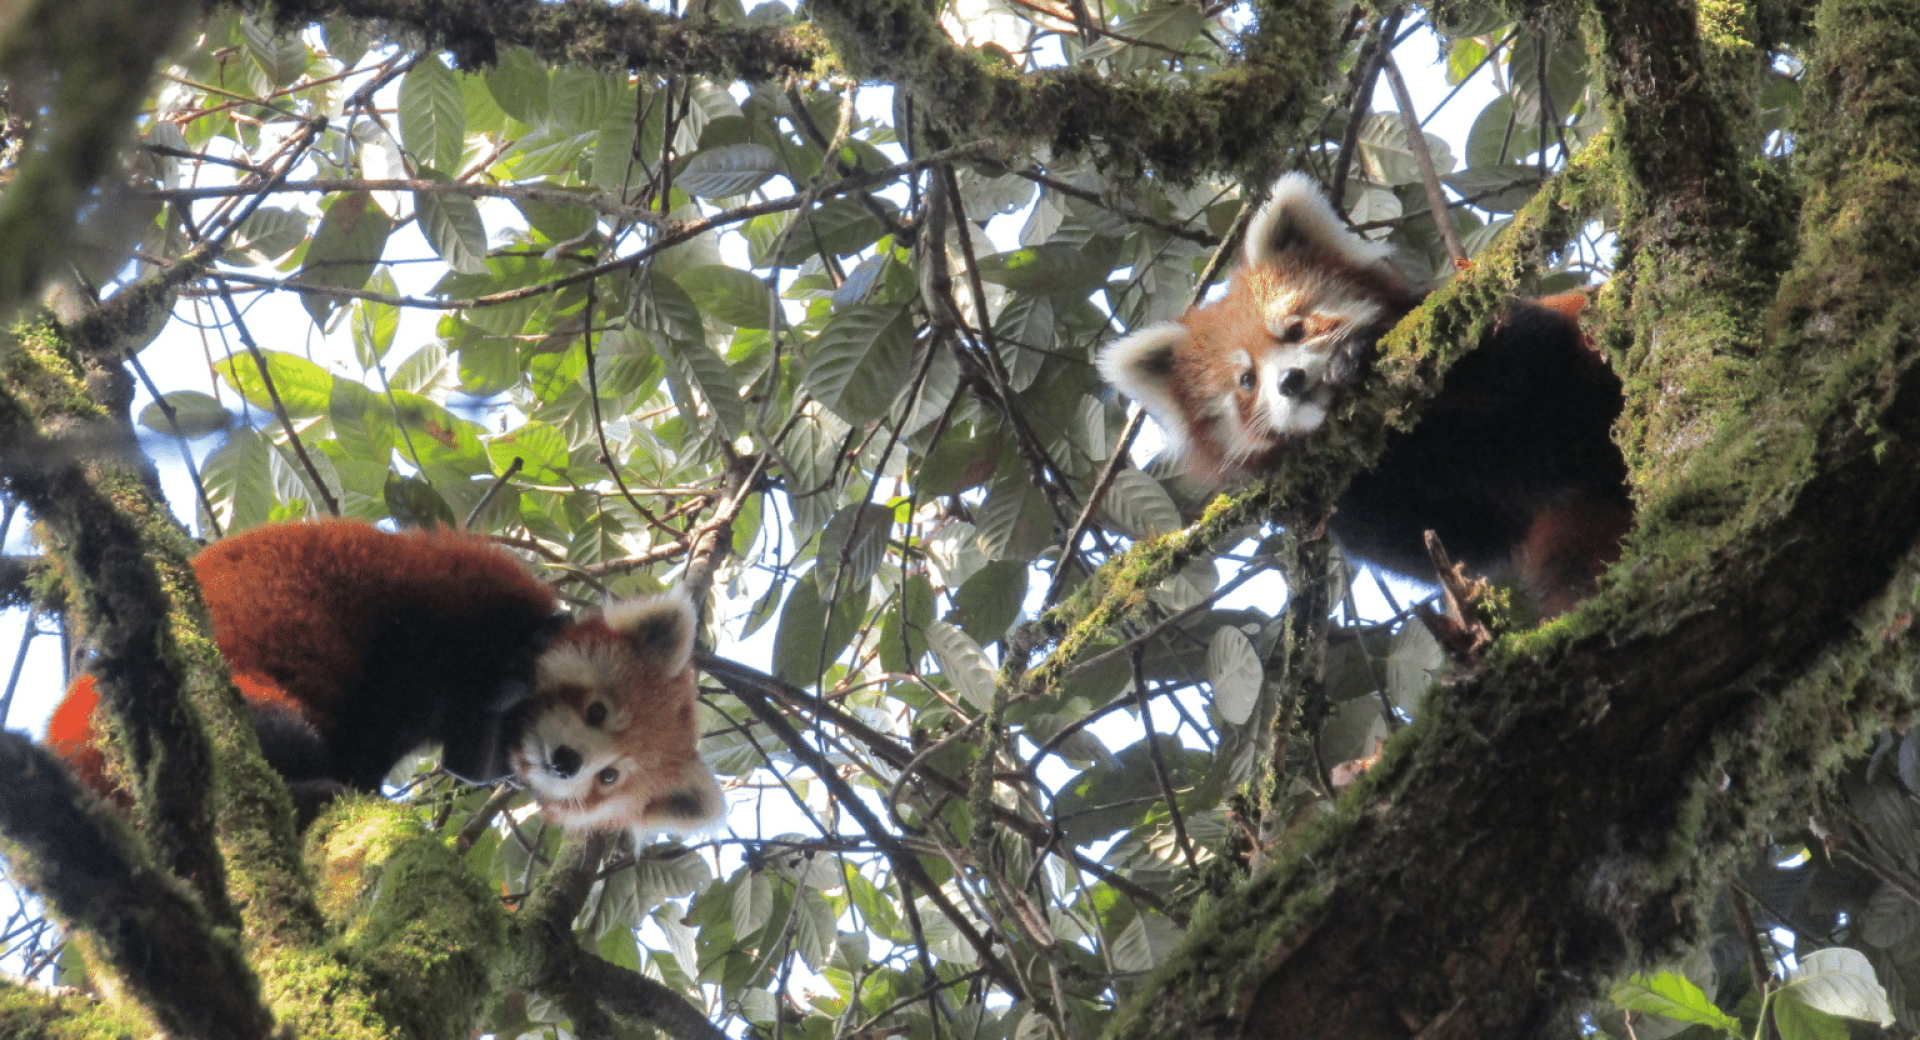 15 Fantastic Facts About Red Pandas